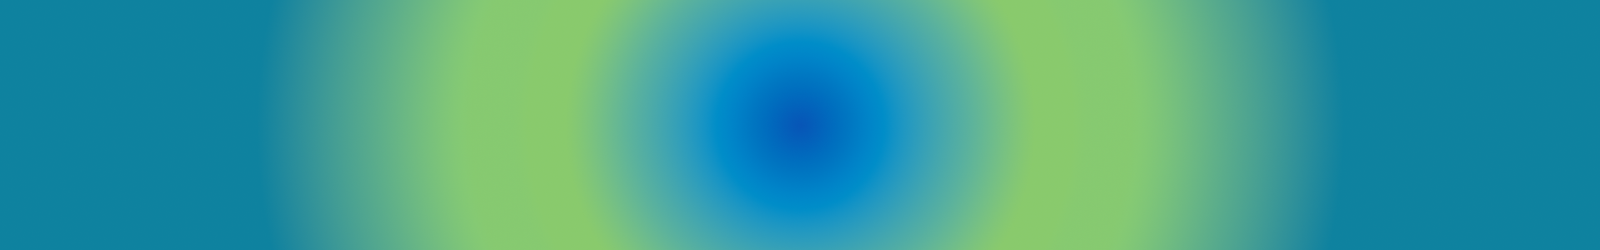 A gradient background, it goes from a light springy green inwards in a circular ring towards a peacock teal blue color. The center of the gradient is centered behind all the text that is overlaid on this.